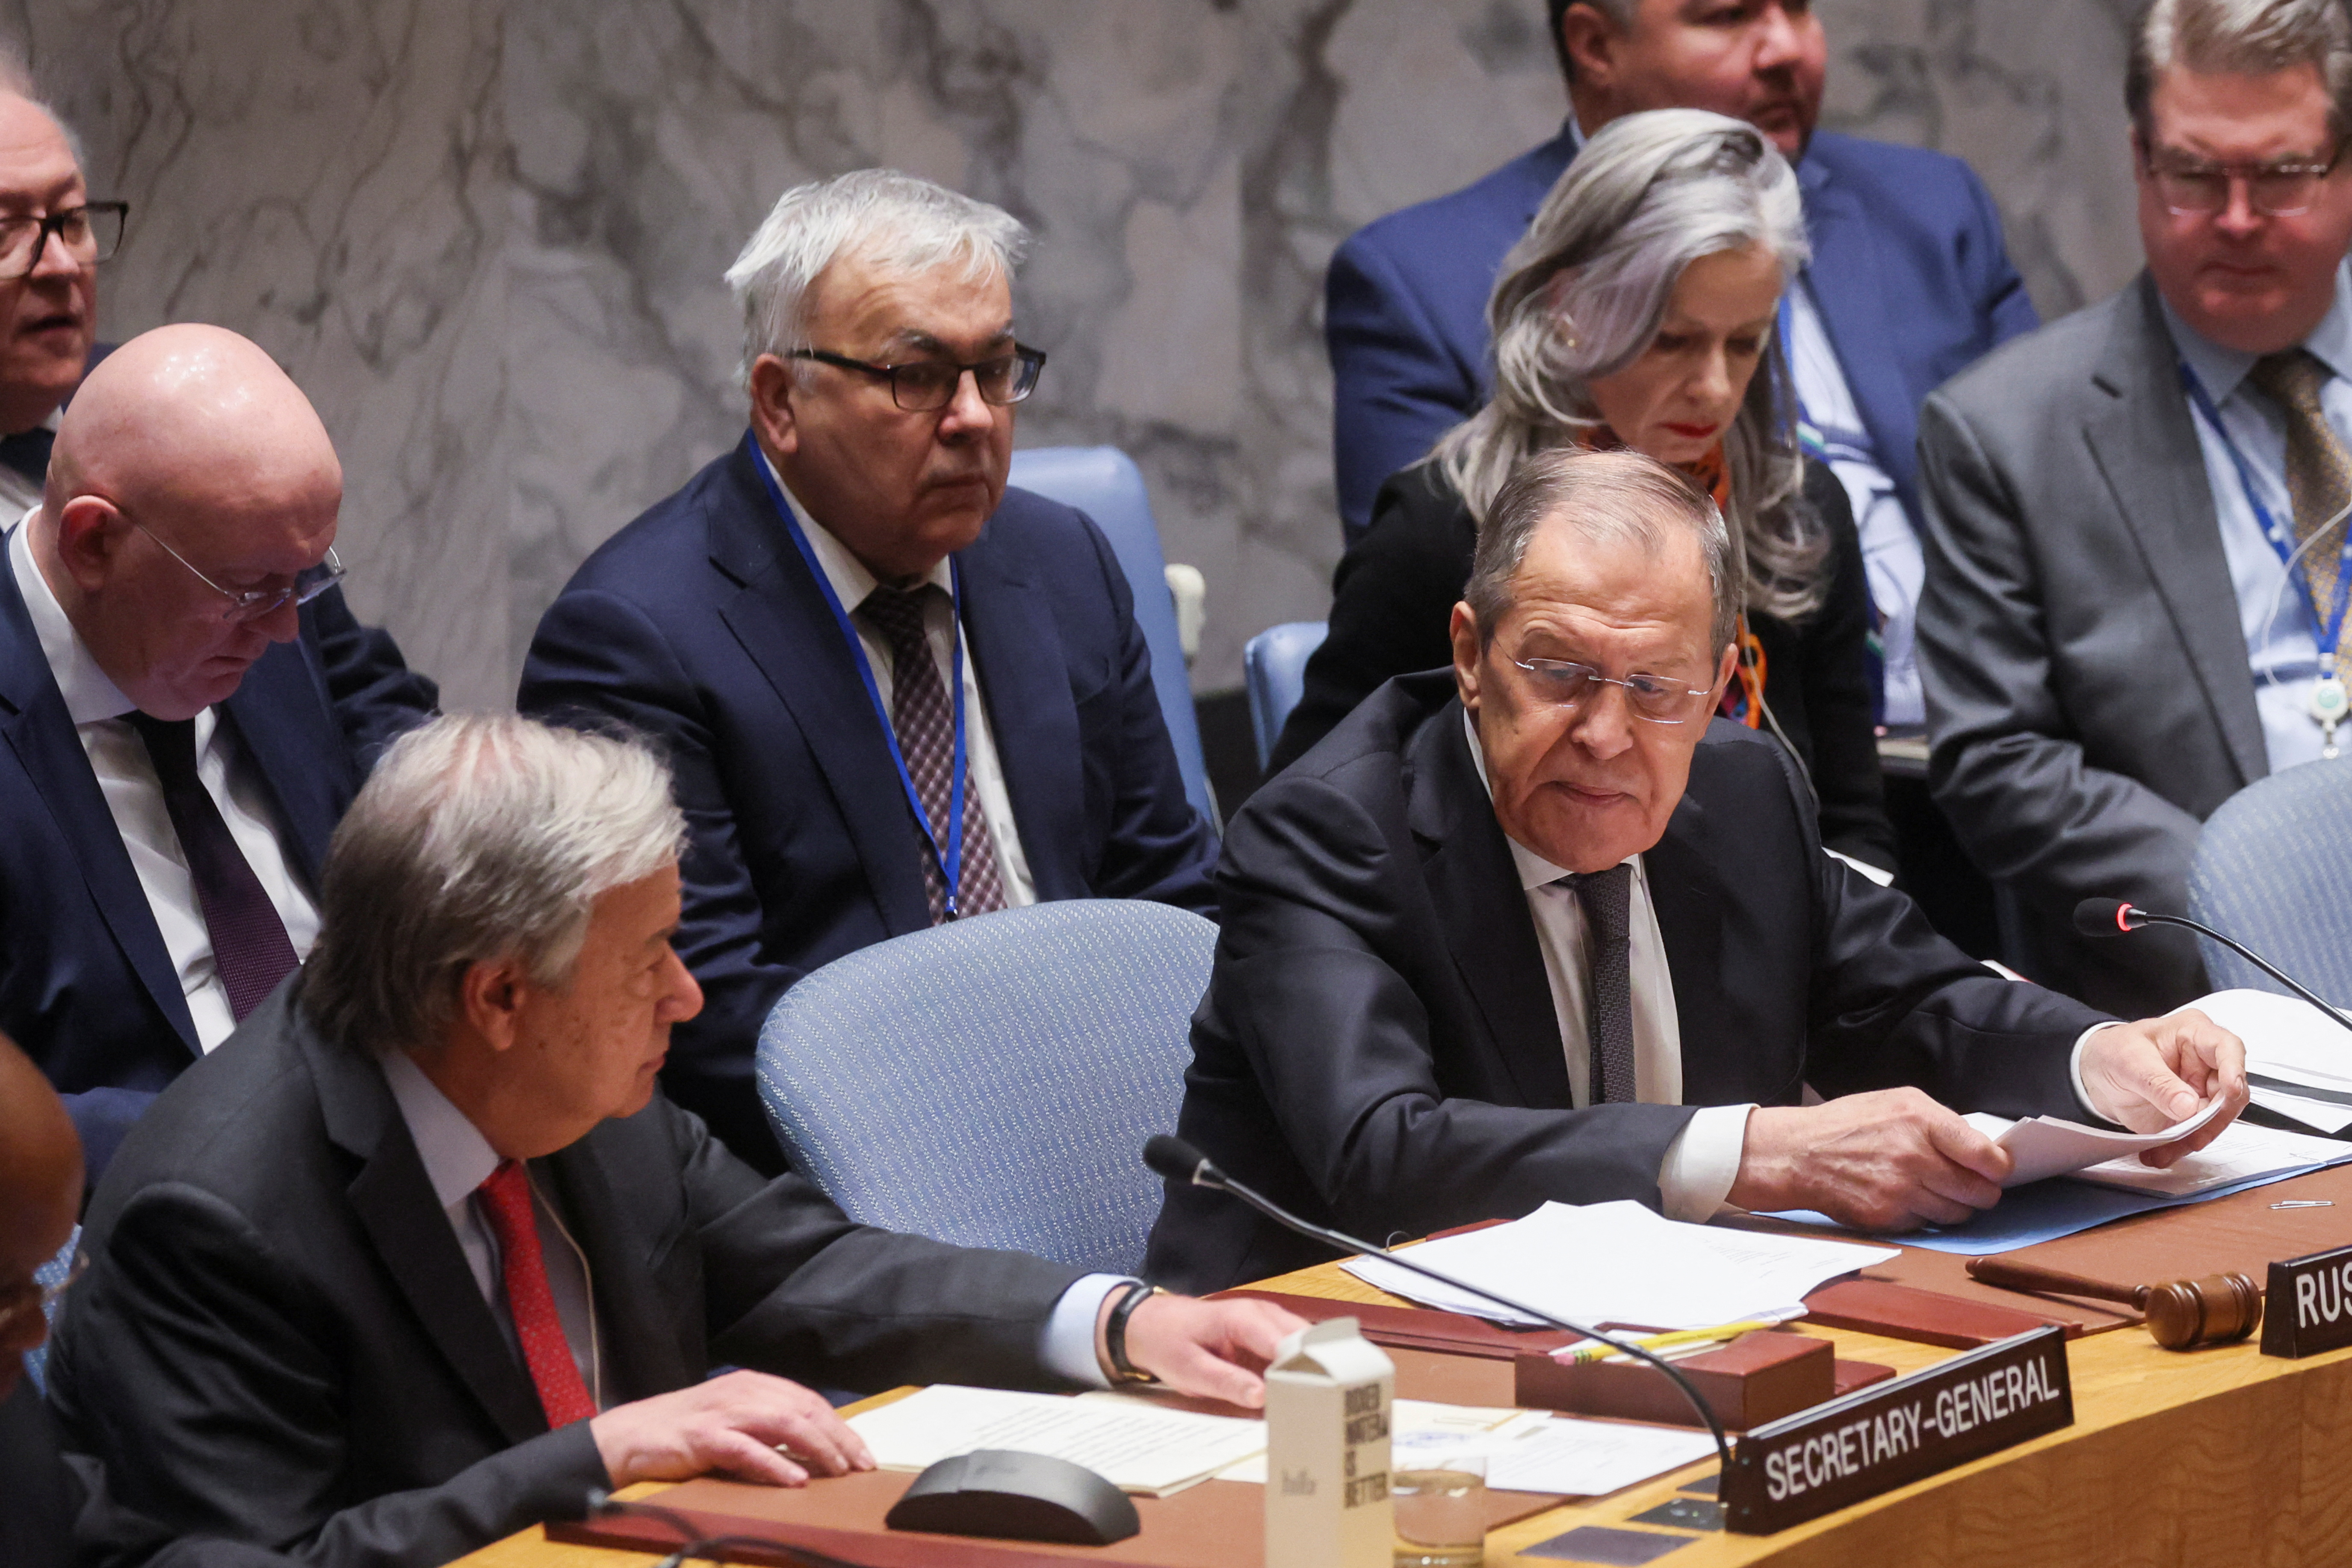 United Nations Secretary-General Antonio Guterres, left, and Russian Foreign Minister Sergei Lavrov attend a meeting of the United Nations Security Council on "Effective multilateralism through the defence of the principles of the Charter of the United Nations," at the U.N. headquarters in New York, on April 24.